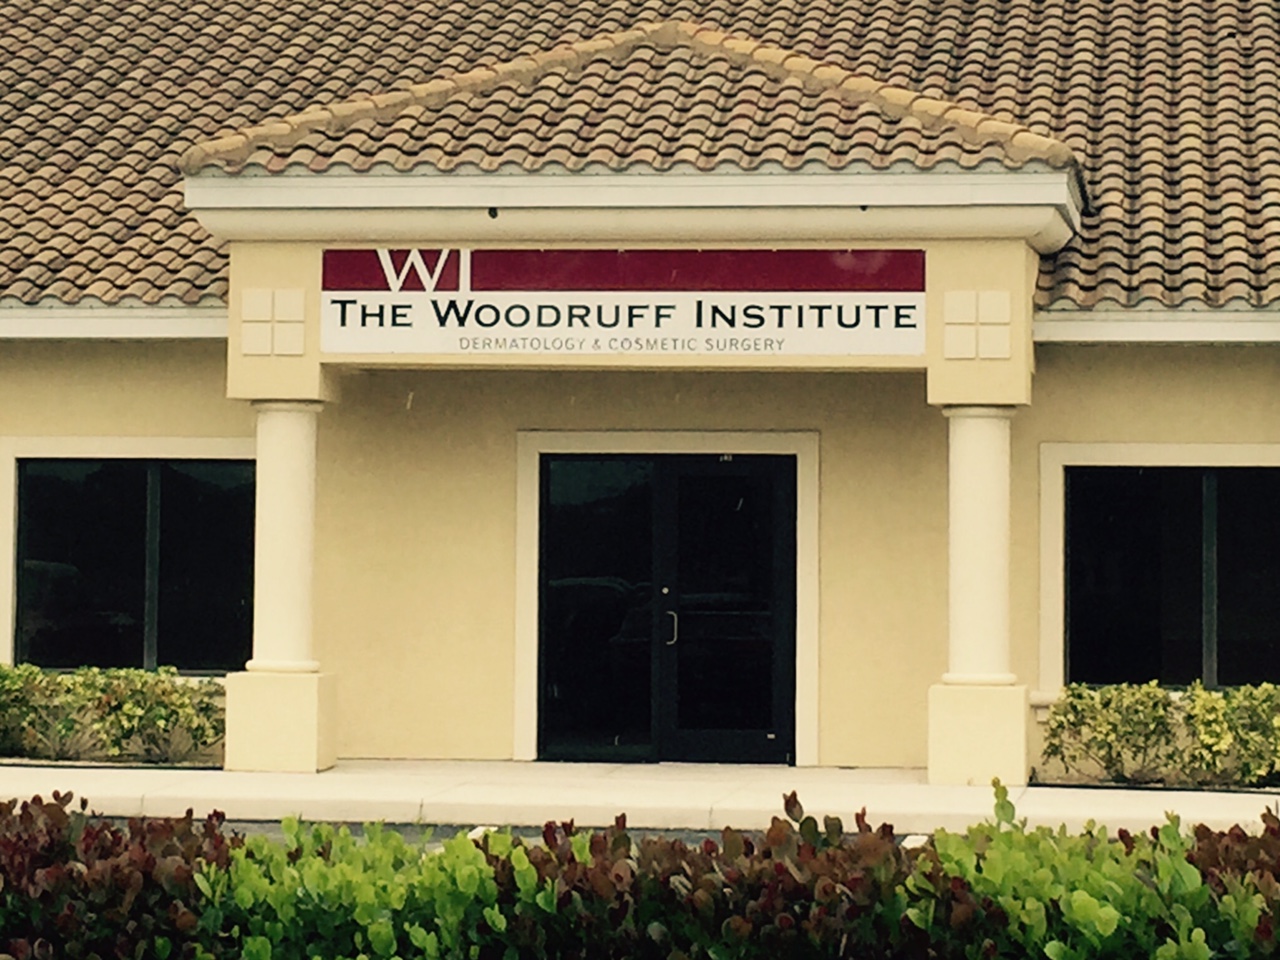 The Woodruff Institute for Dermatology & Cosmetic Surgery now seeing patients in our newest location in Fort Myers!